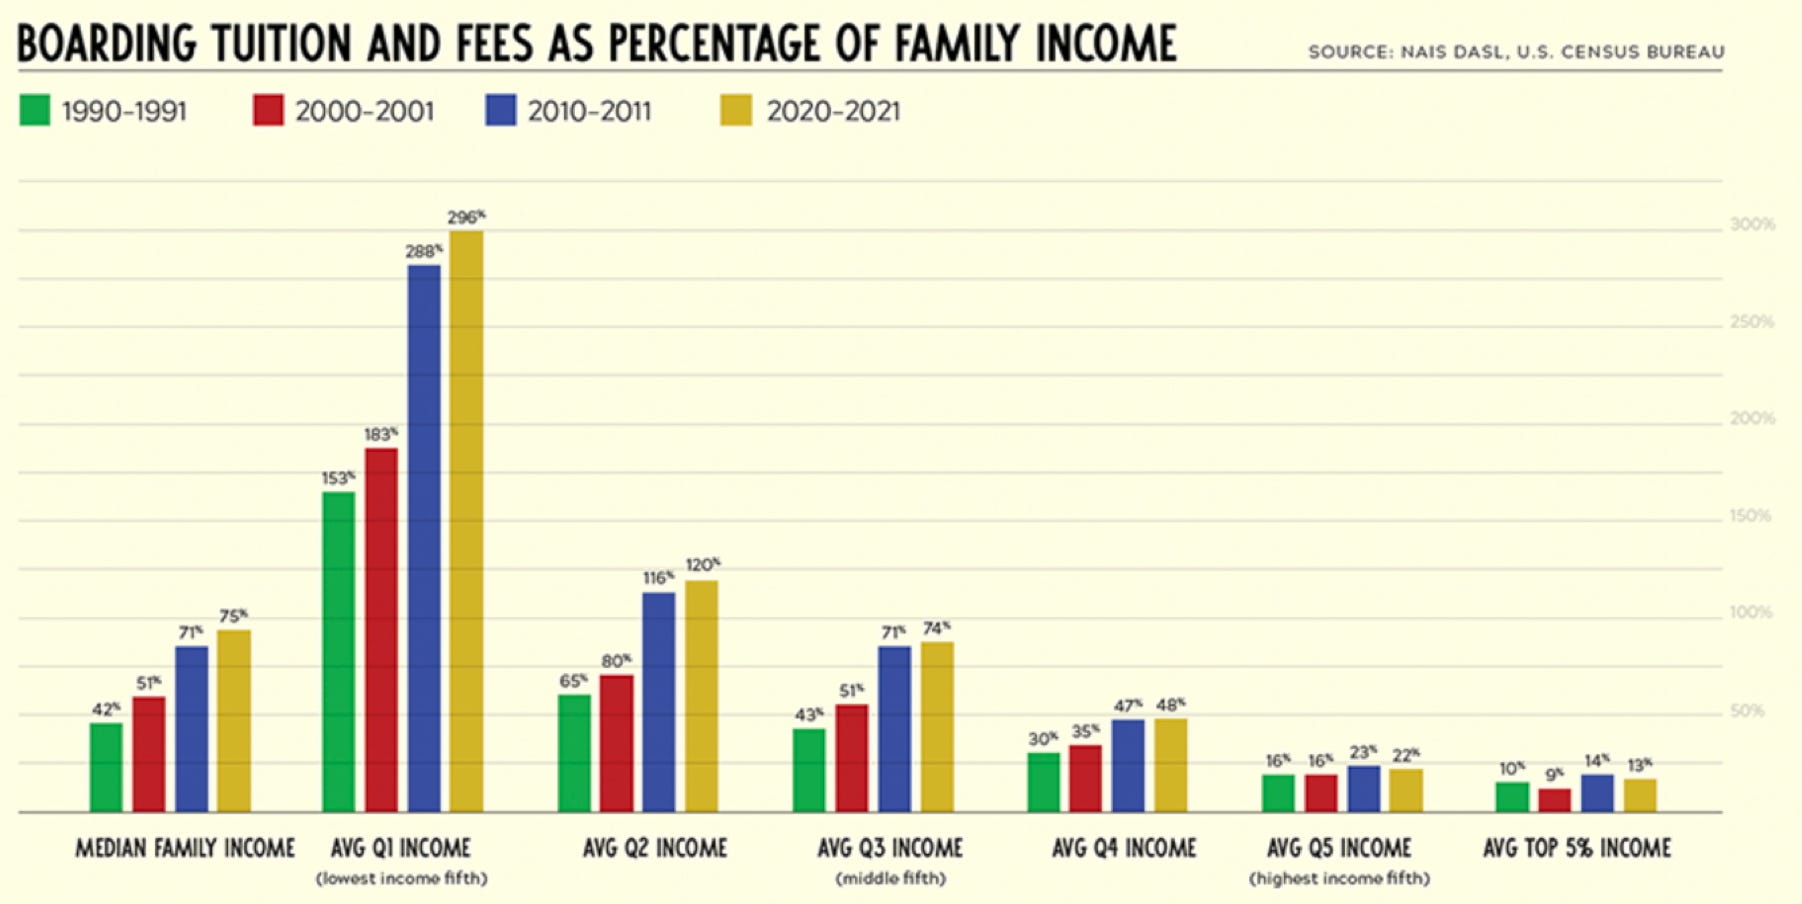 Boarding tuition fees as percentage of family income